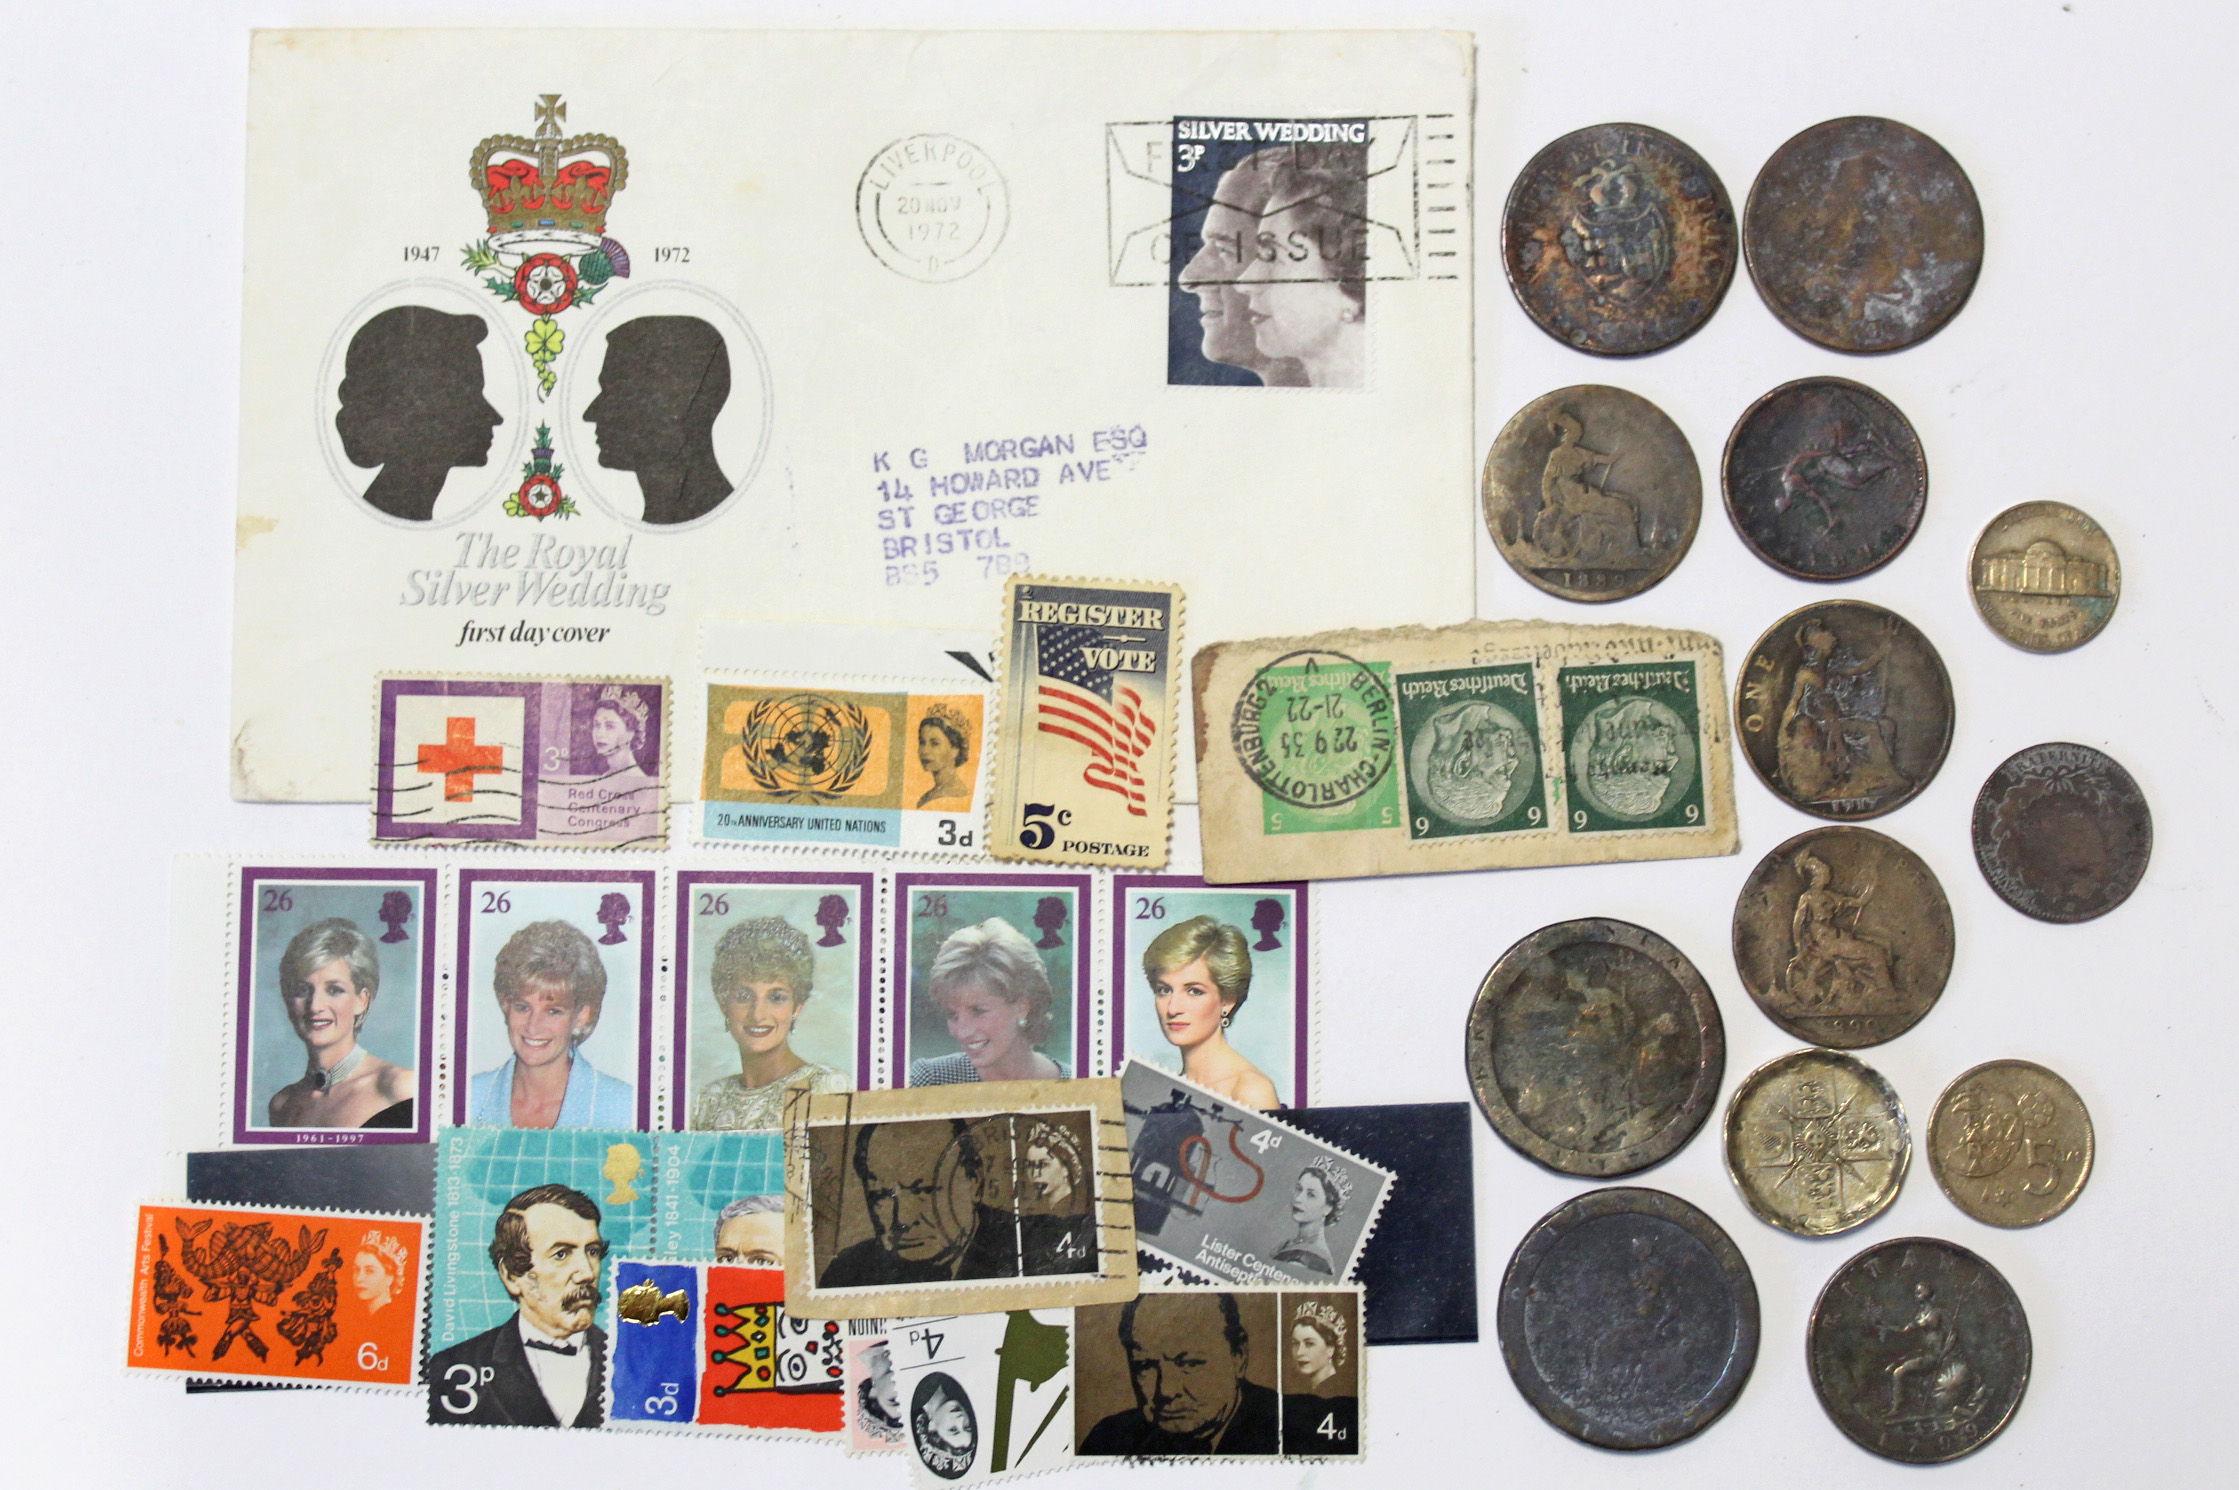 Two “Cartwheel” pennies; sundry other coins; a 1972 Royal Silver Wedding First Day Cover; & a few